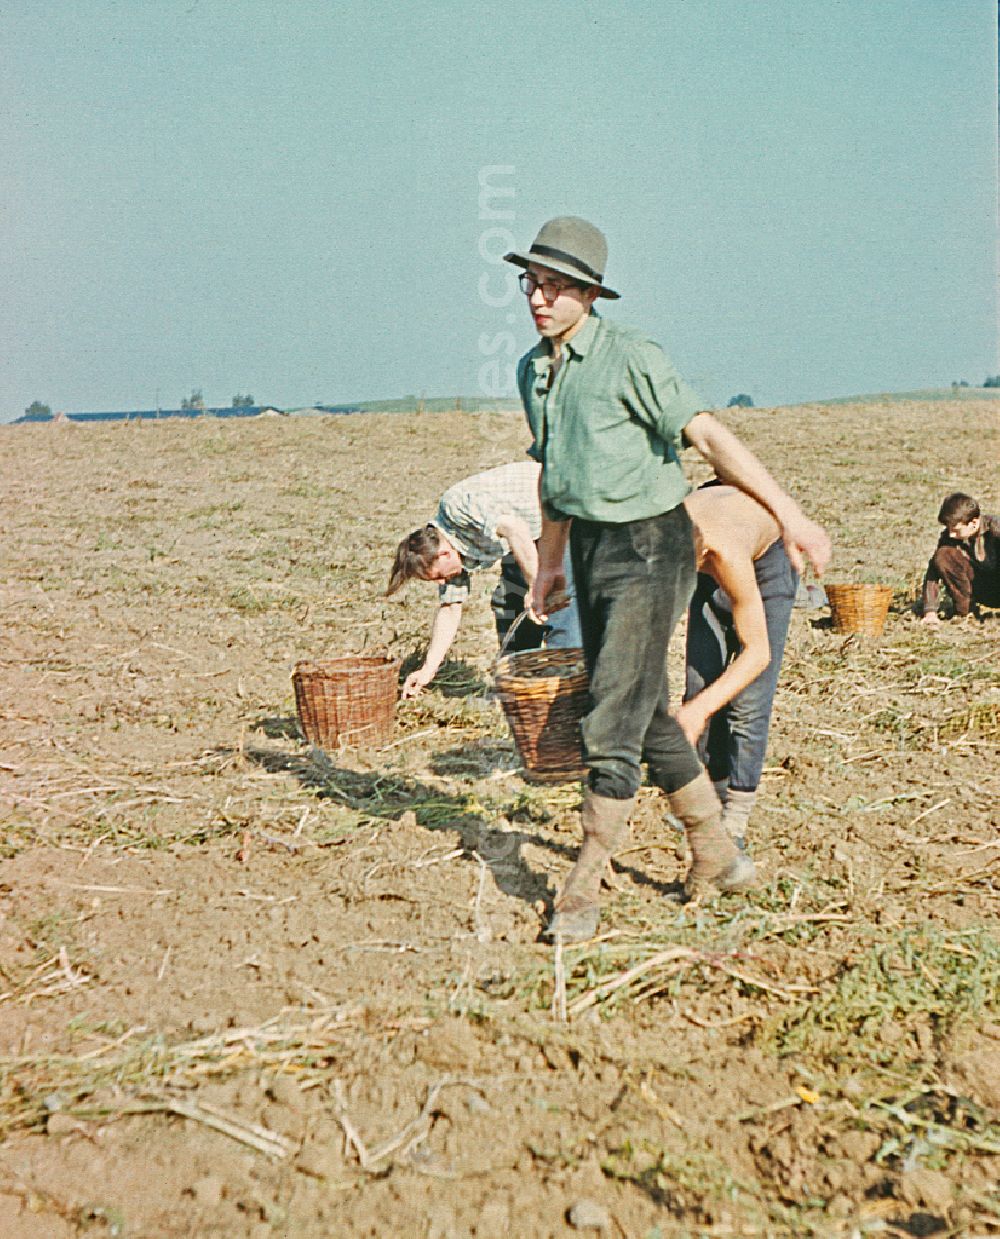 GDR picture archive: Wegendorf - Break during the potato harvest in a field by 9th grade students at a high school in Wegendorf, Brandenburg in the territory of the former GDR, German Democratic Republic